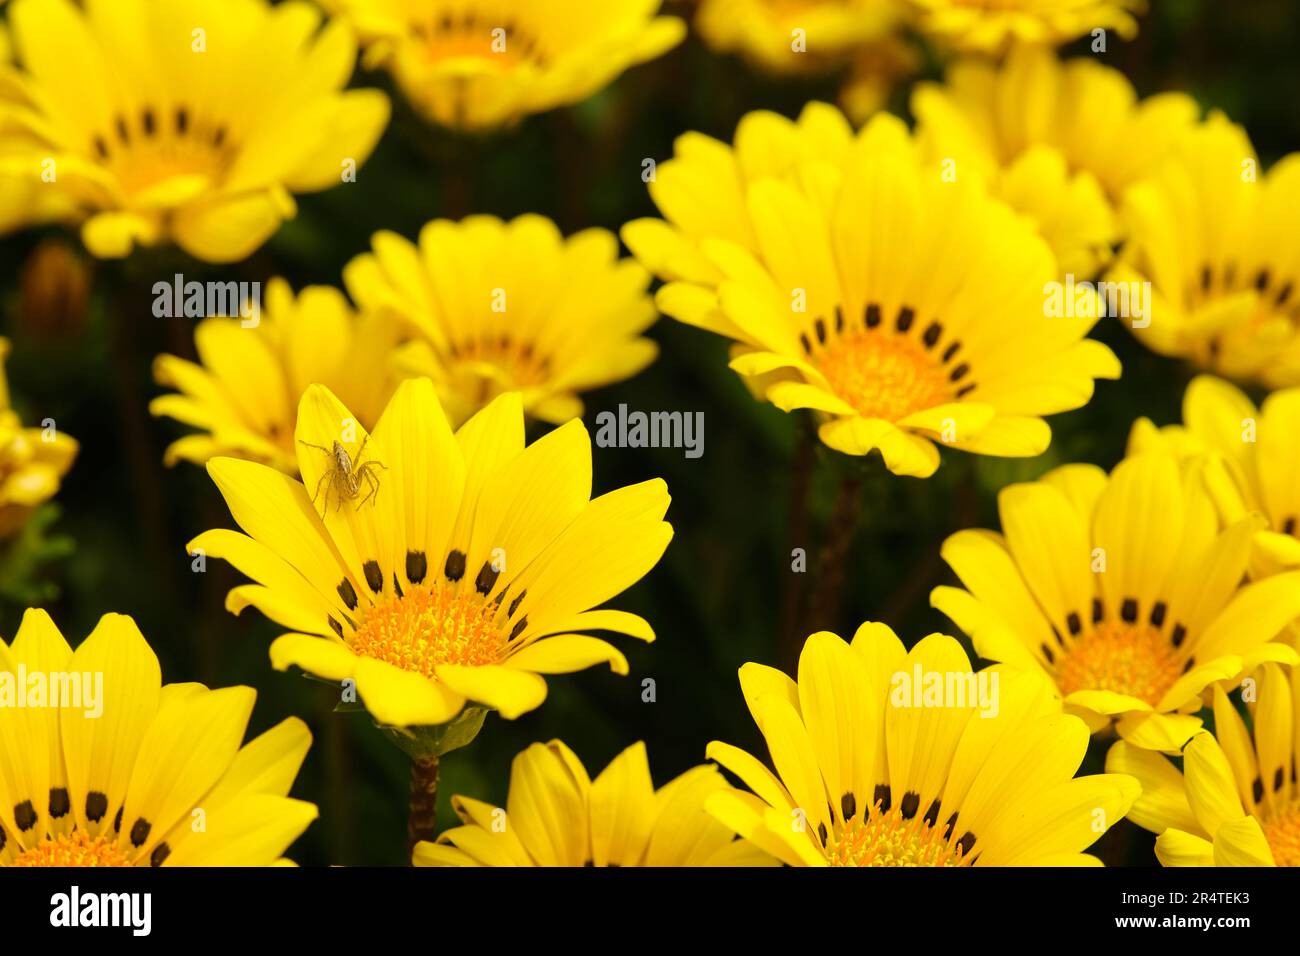 Striped Lynx Spider (Oxyopes salticus) on Treasure flower or Gazania rigens, daisy-like composite flower head consisting of bright yellow petals with Stock Photo